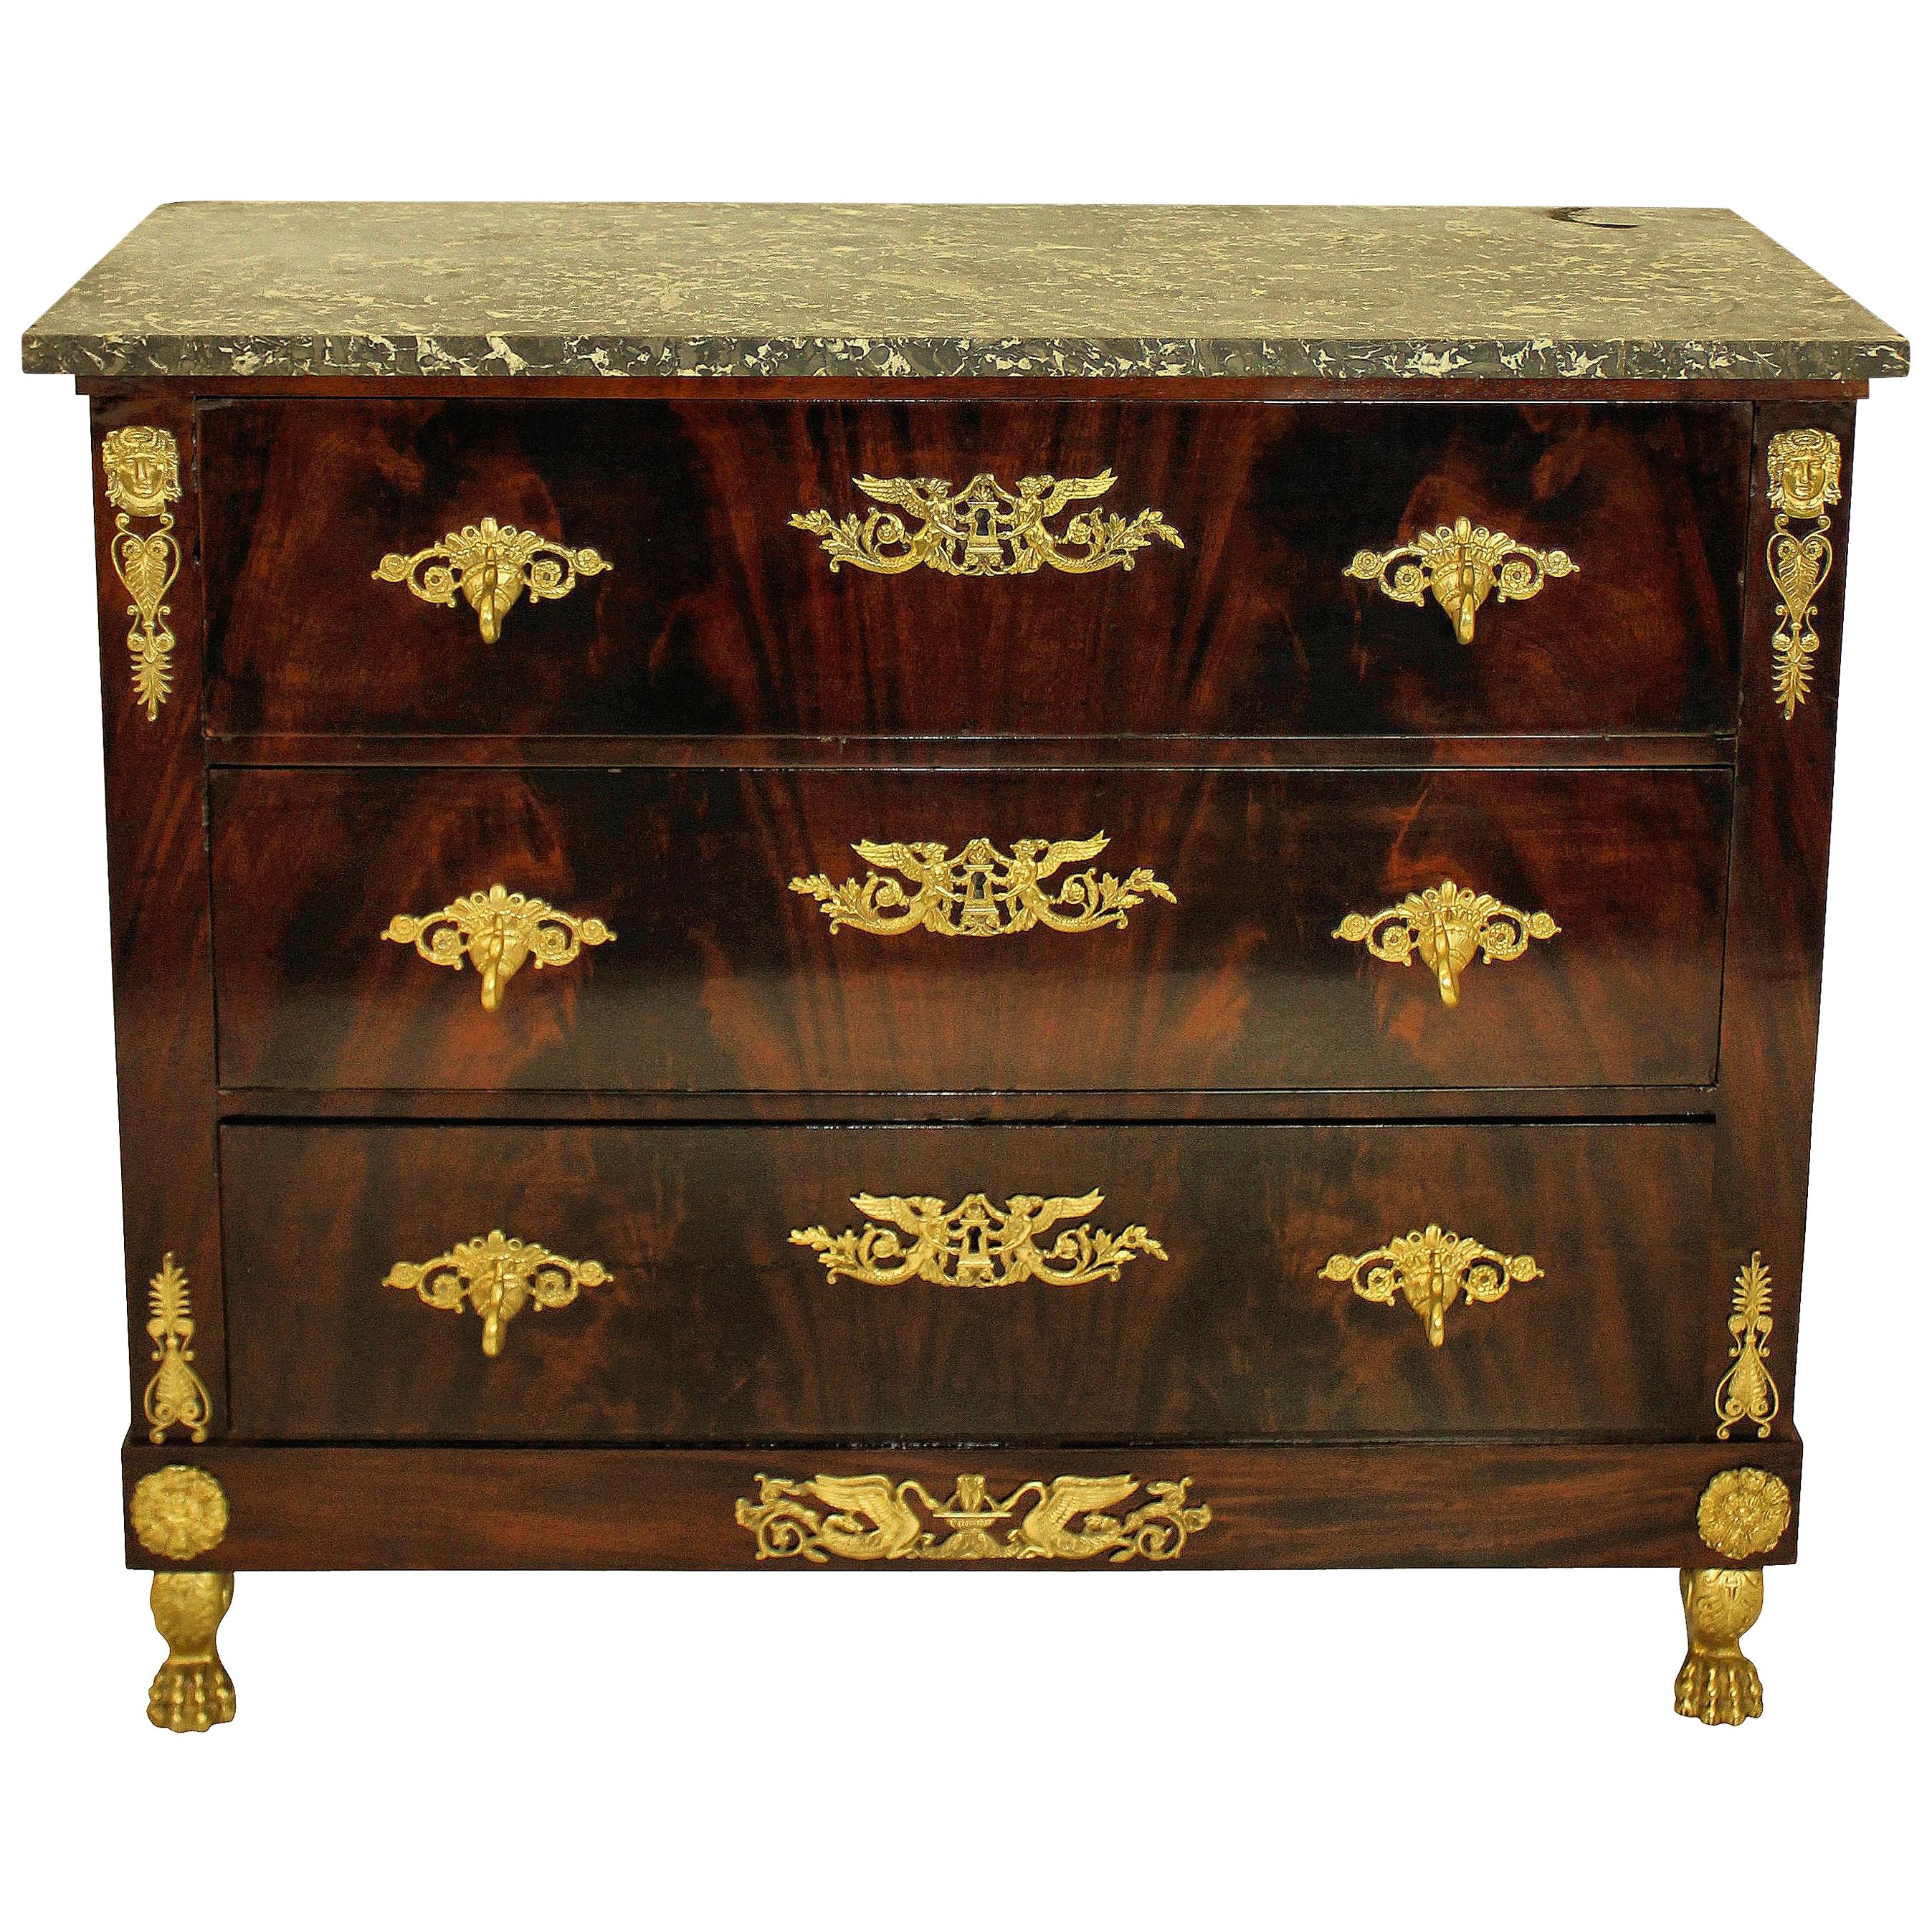 Fine French Empire Flame Mahogany and Gilt Bronze Mounted Commode